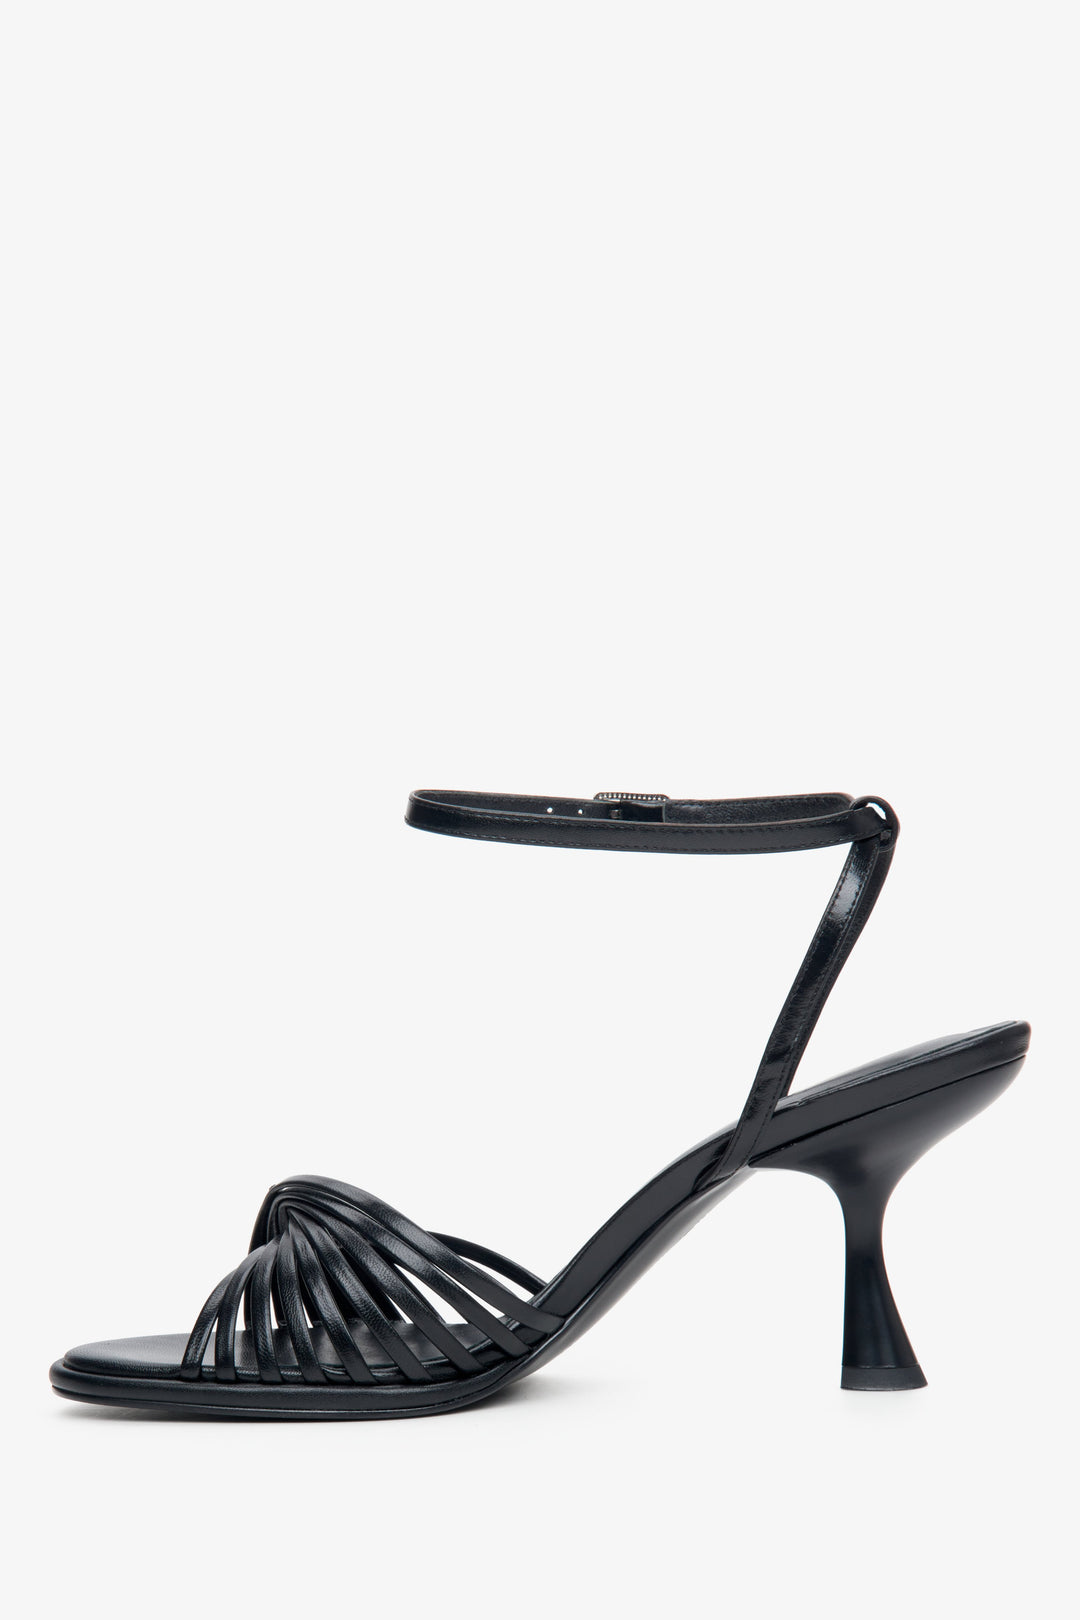 Women's leather sandals with black heels - side profile of the shoe.